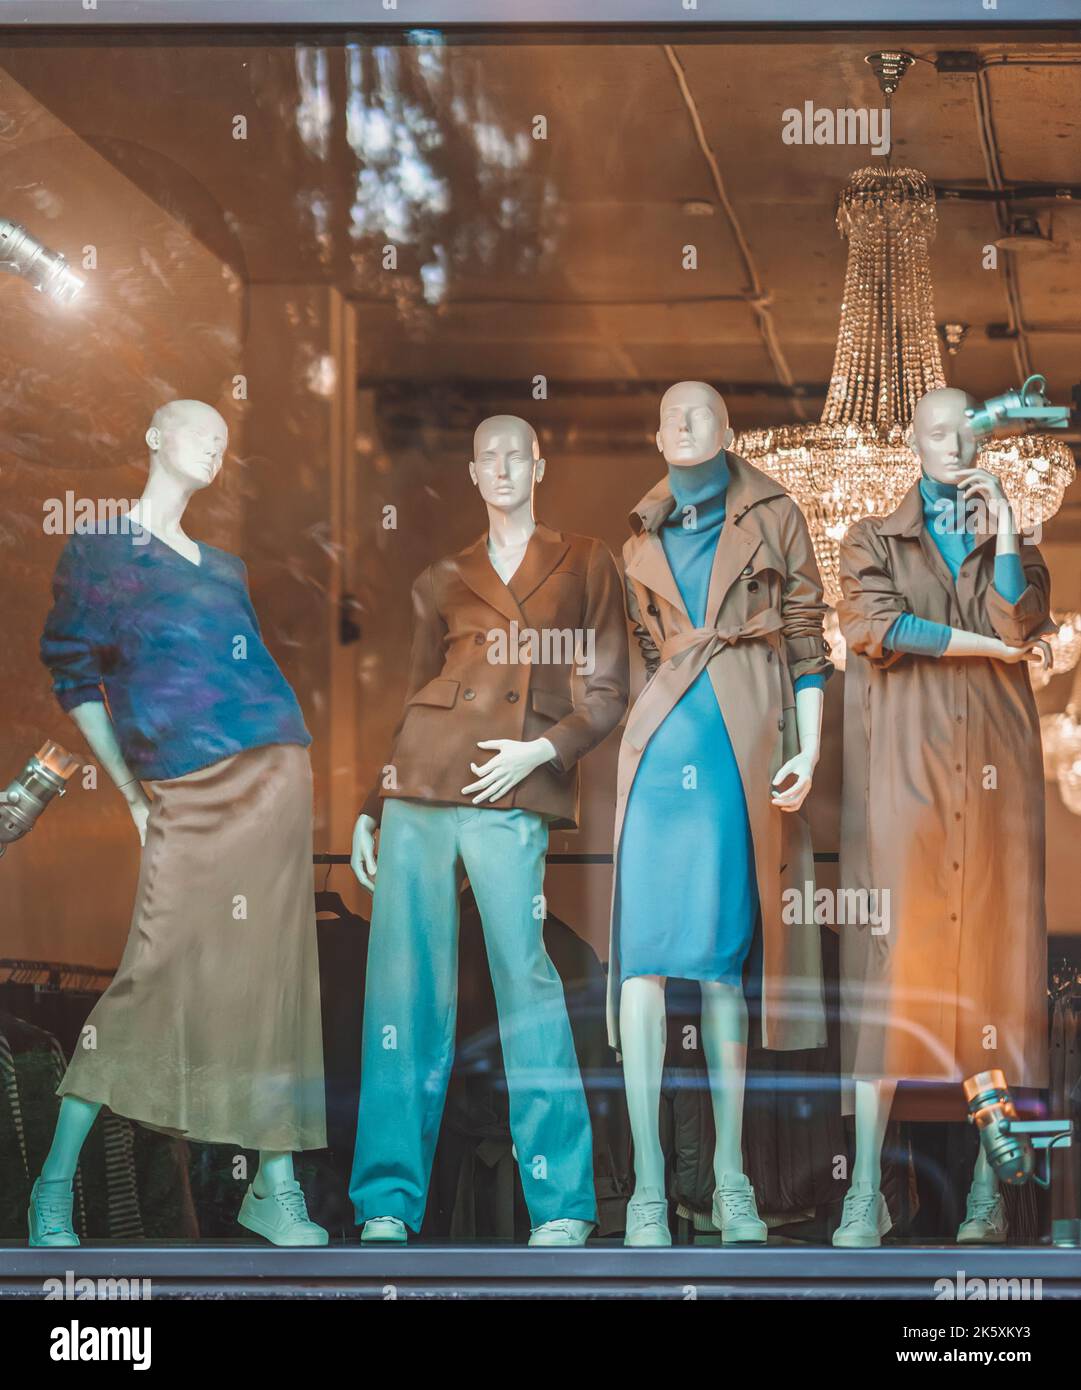 Female mannequins in shop window with demi-season clothing, street reflection. Shopping Stock Photo